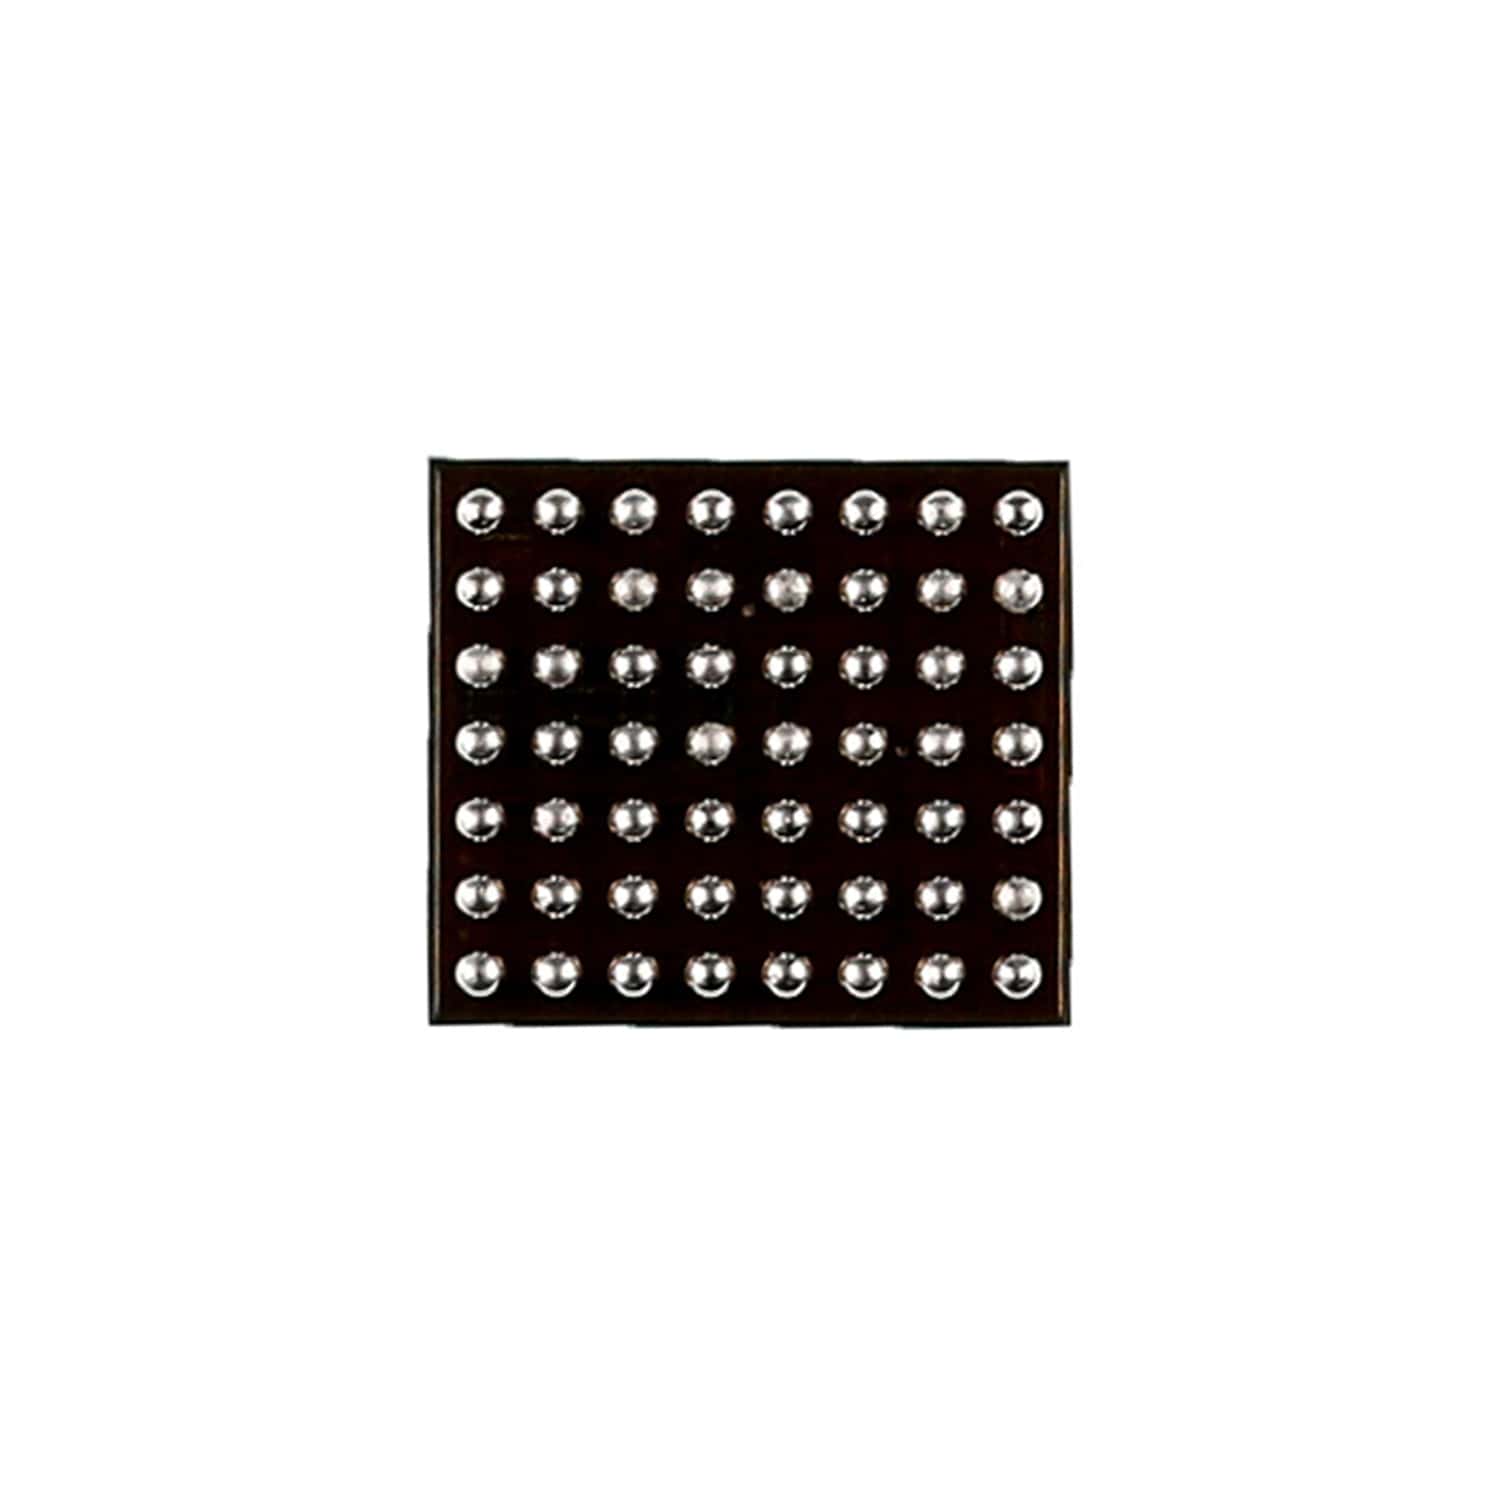 Apple iPhone 8/iPhone 8 Plus/iPhone SE (2020) Charging IC Chip - 6300 - 1612A1 